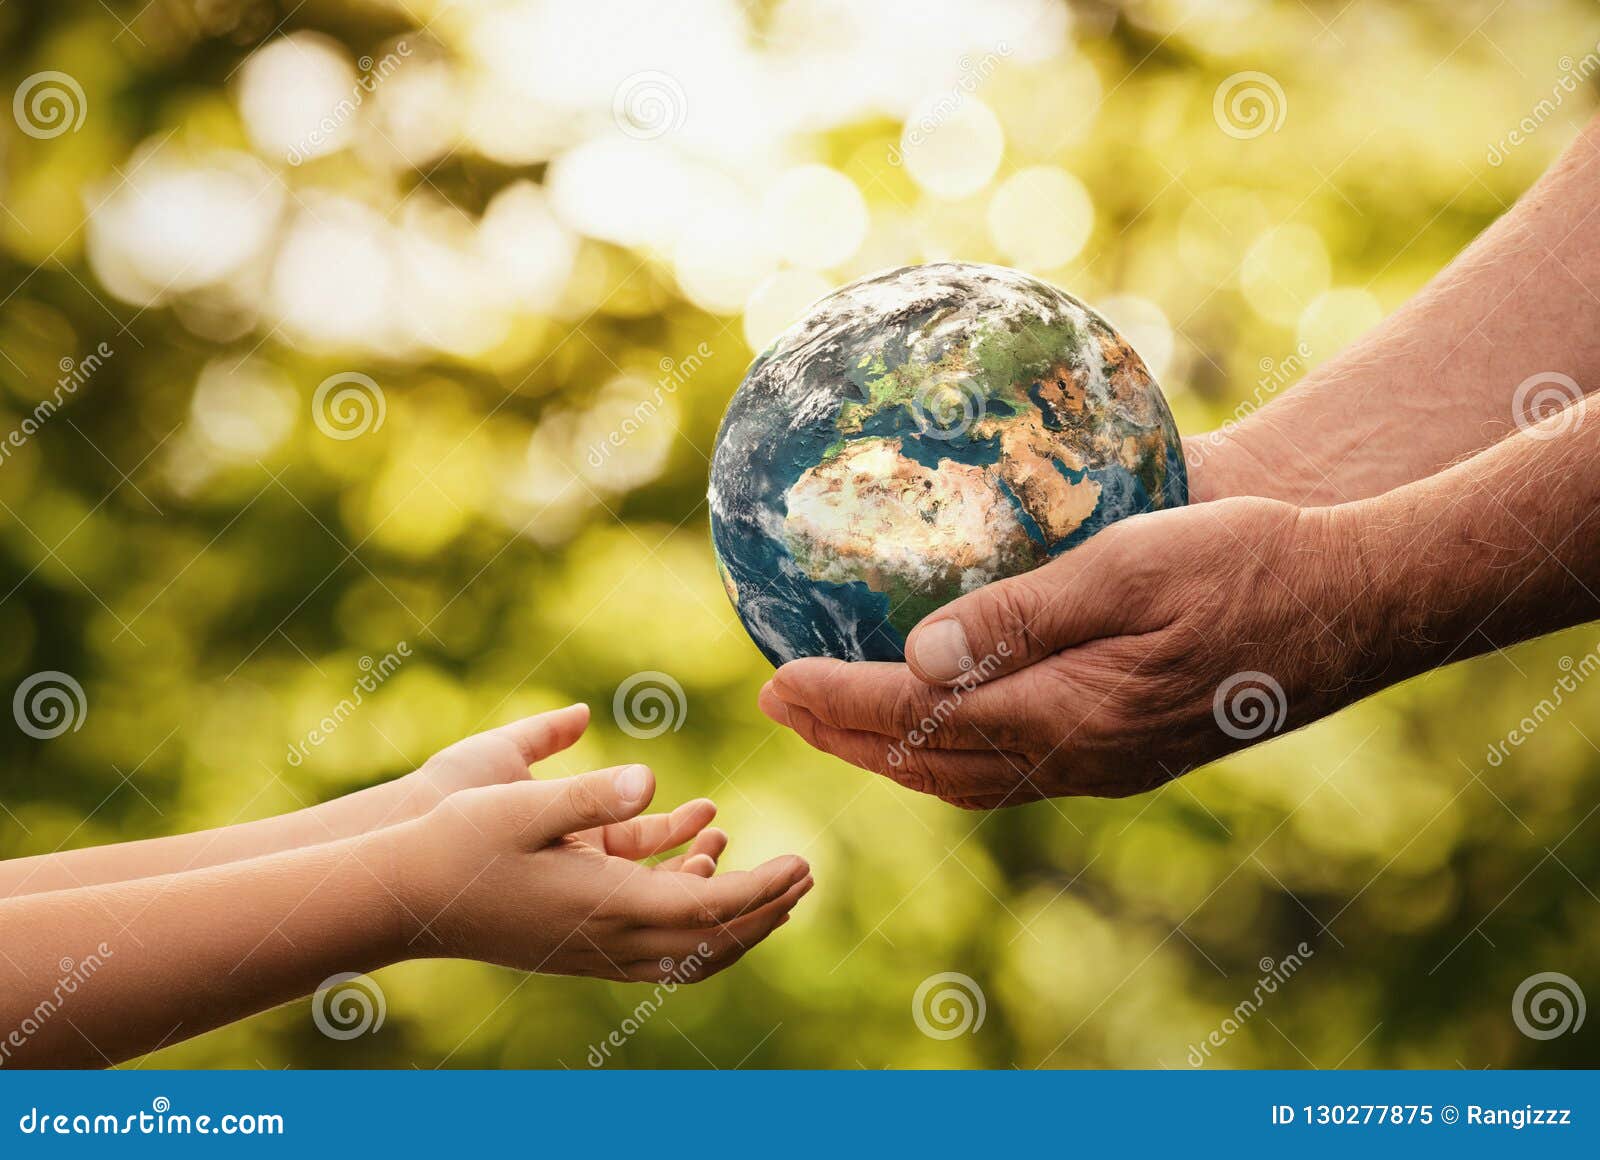 senior hands giving planet earth to a child